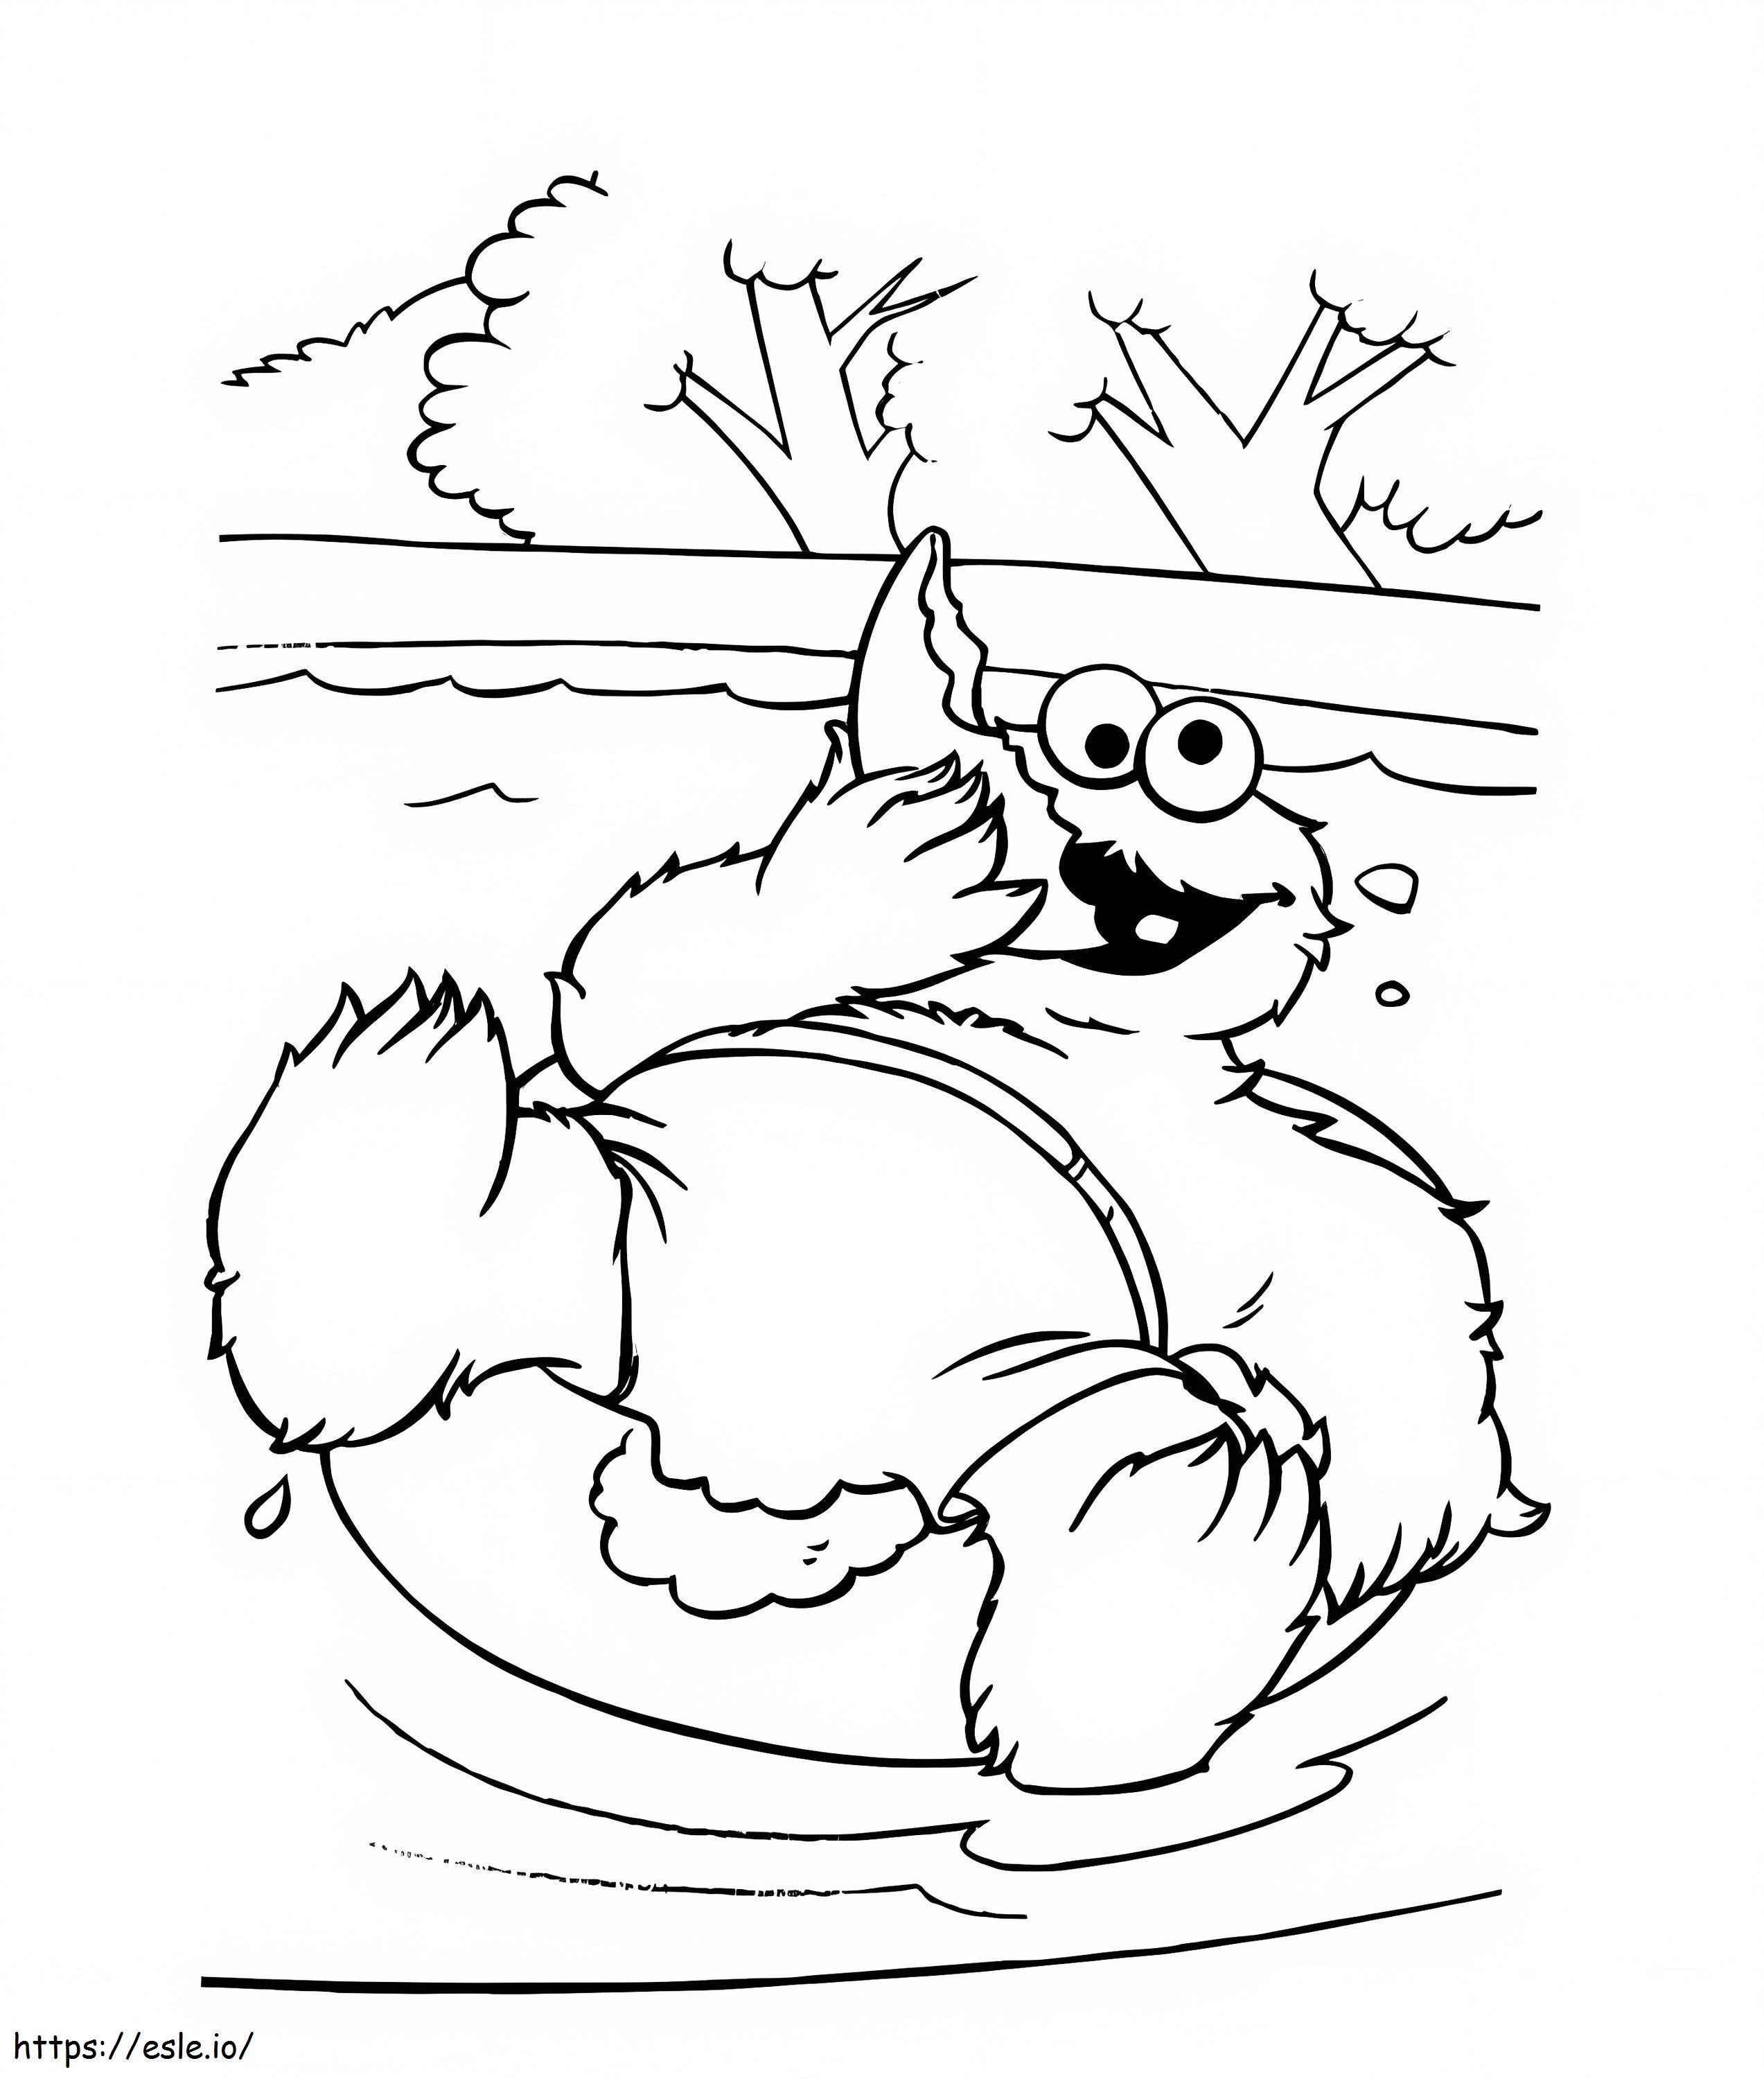 Cookie Monster Is Swimming coloring page